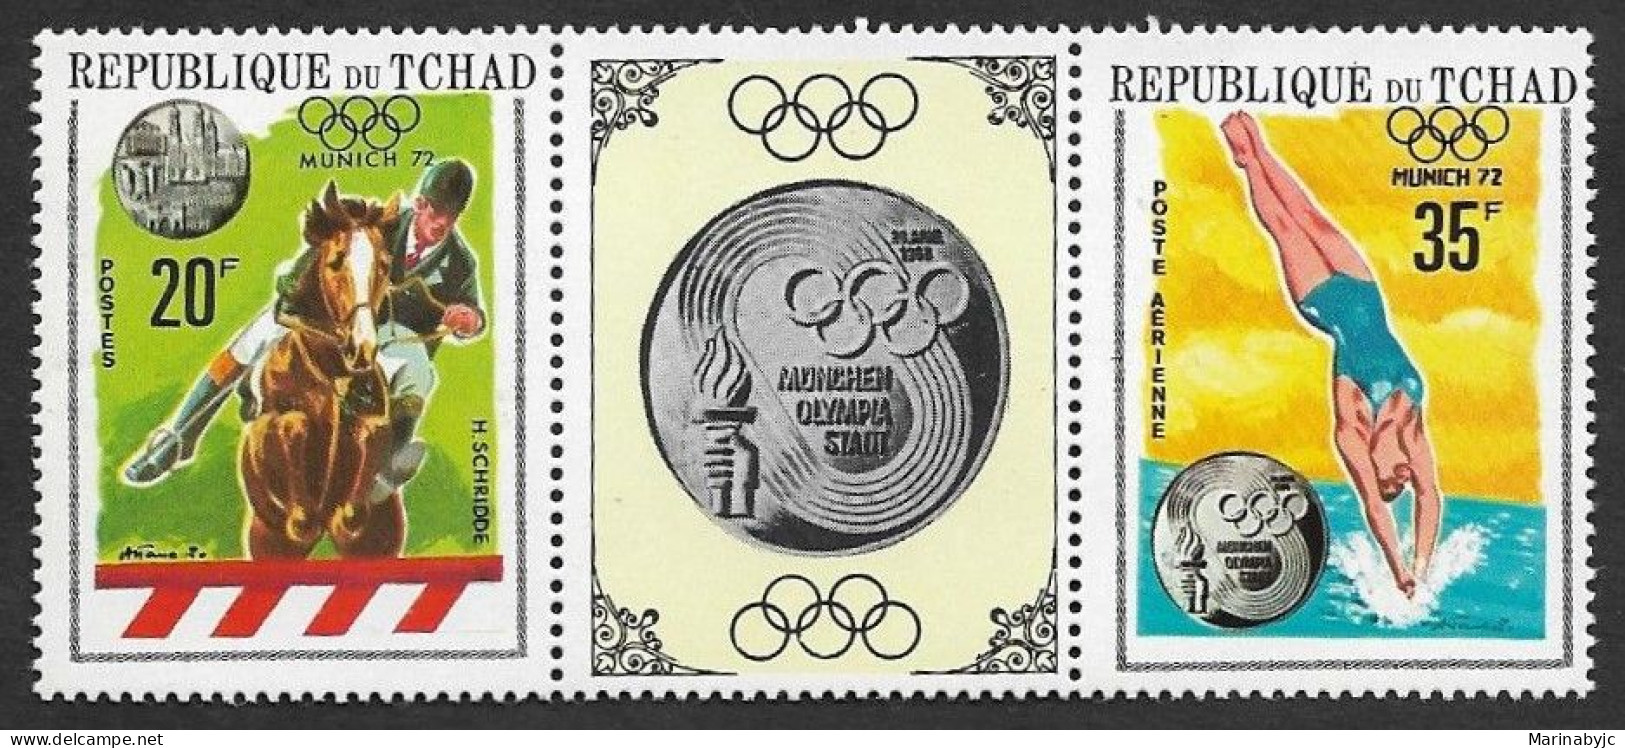 SD)1972 CHAD SPORTS SERIES, OLYMPIC GAMES MUNICH, GERMAN R. F. WINNERS, STRIP OF 3 MNH STAMPS - Chad (1960-...)